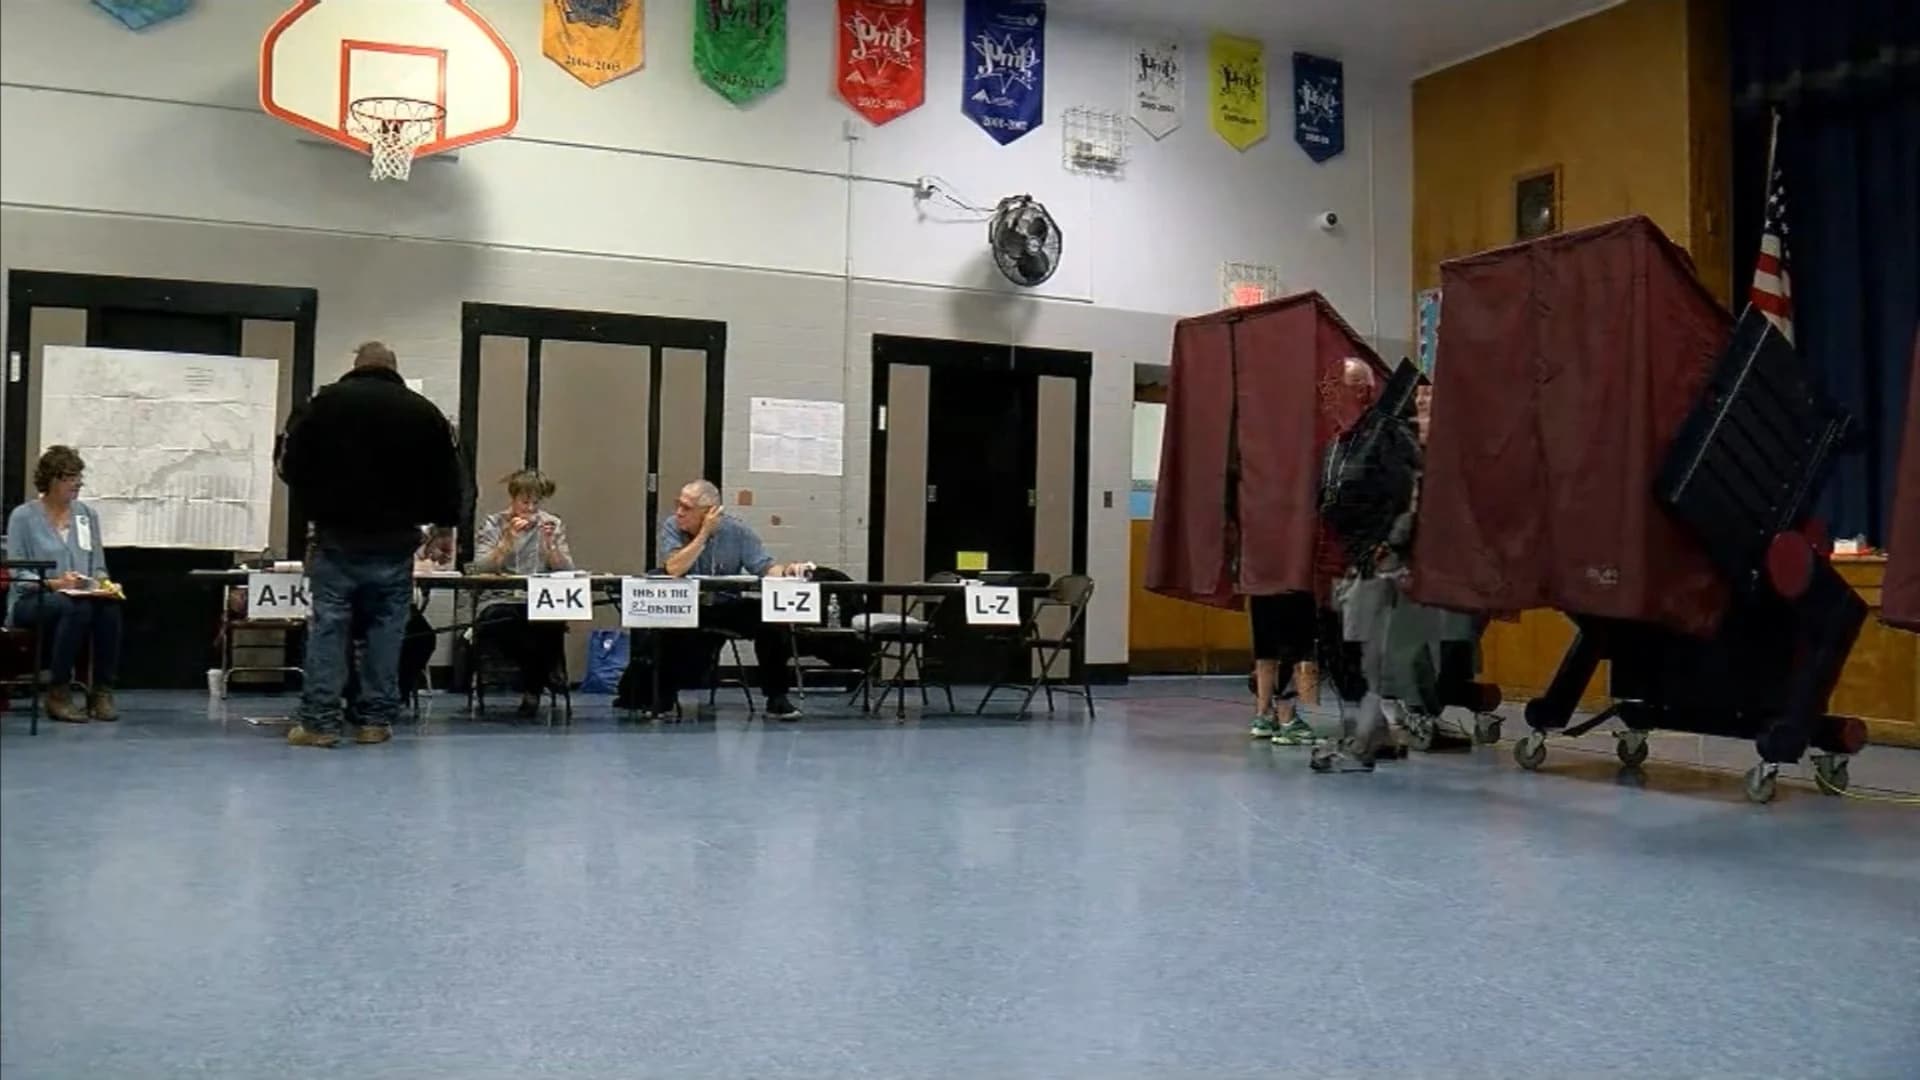 No major voting issues reported in New Jersey